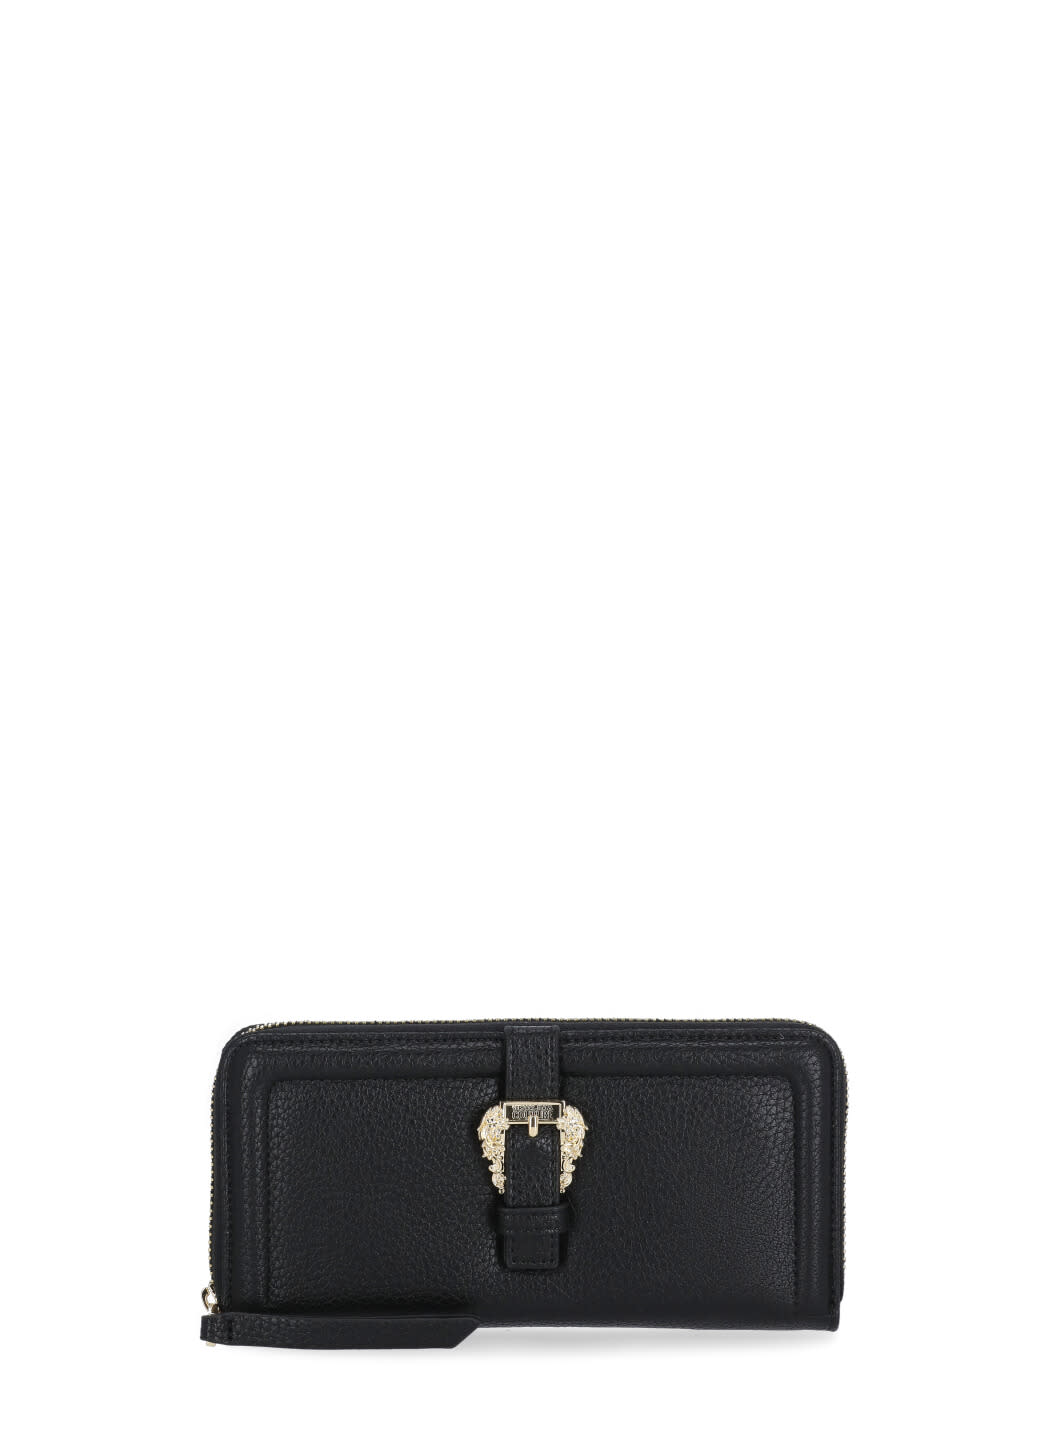 Versace Jeans Couture Pebbled Eco-leather Wallet